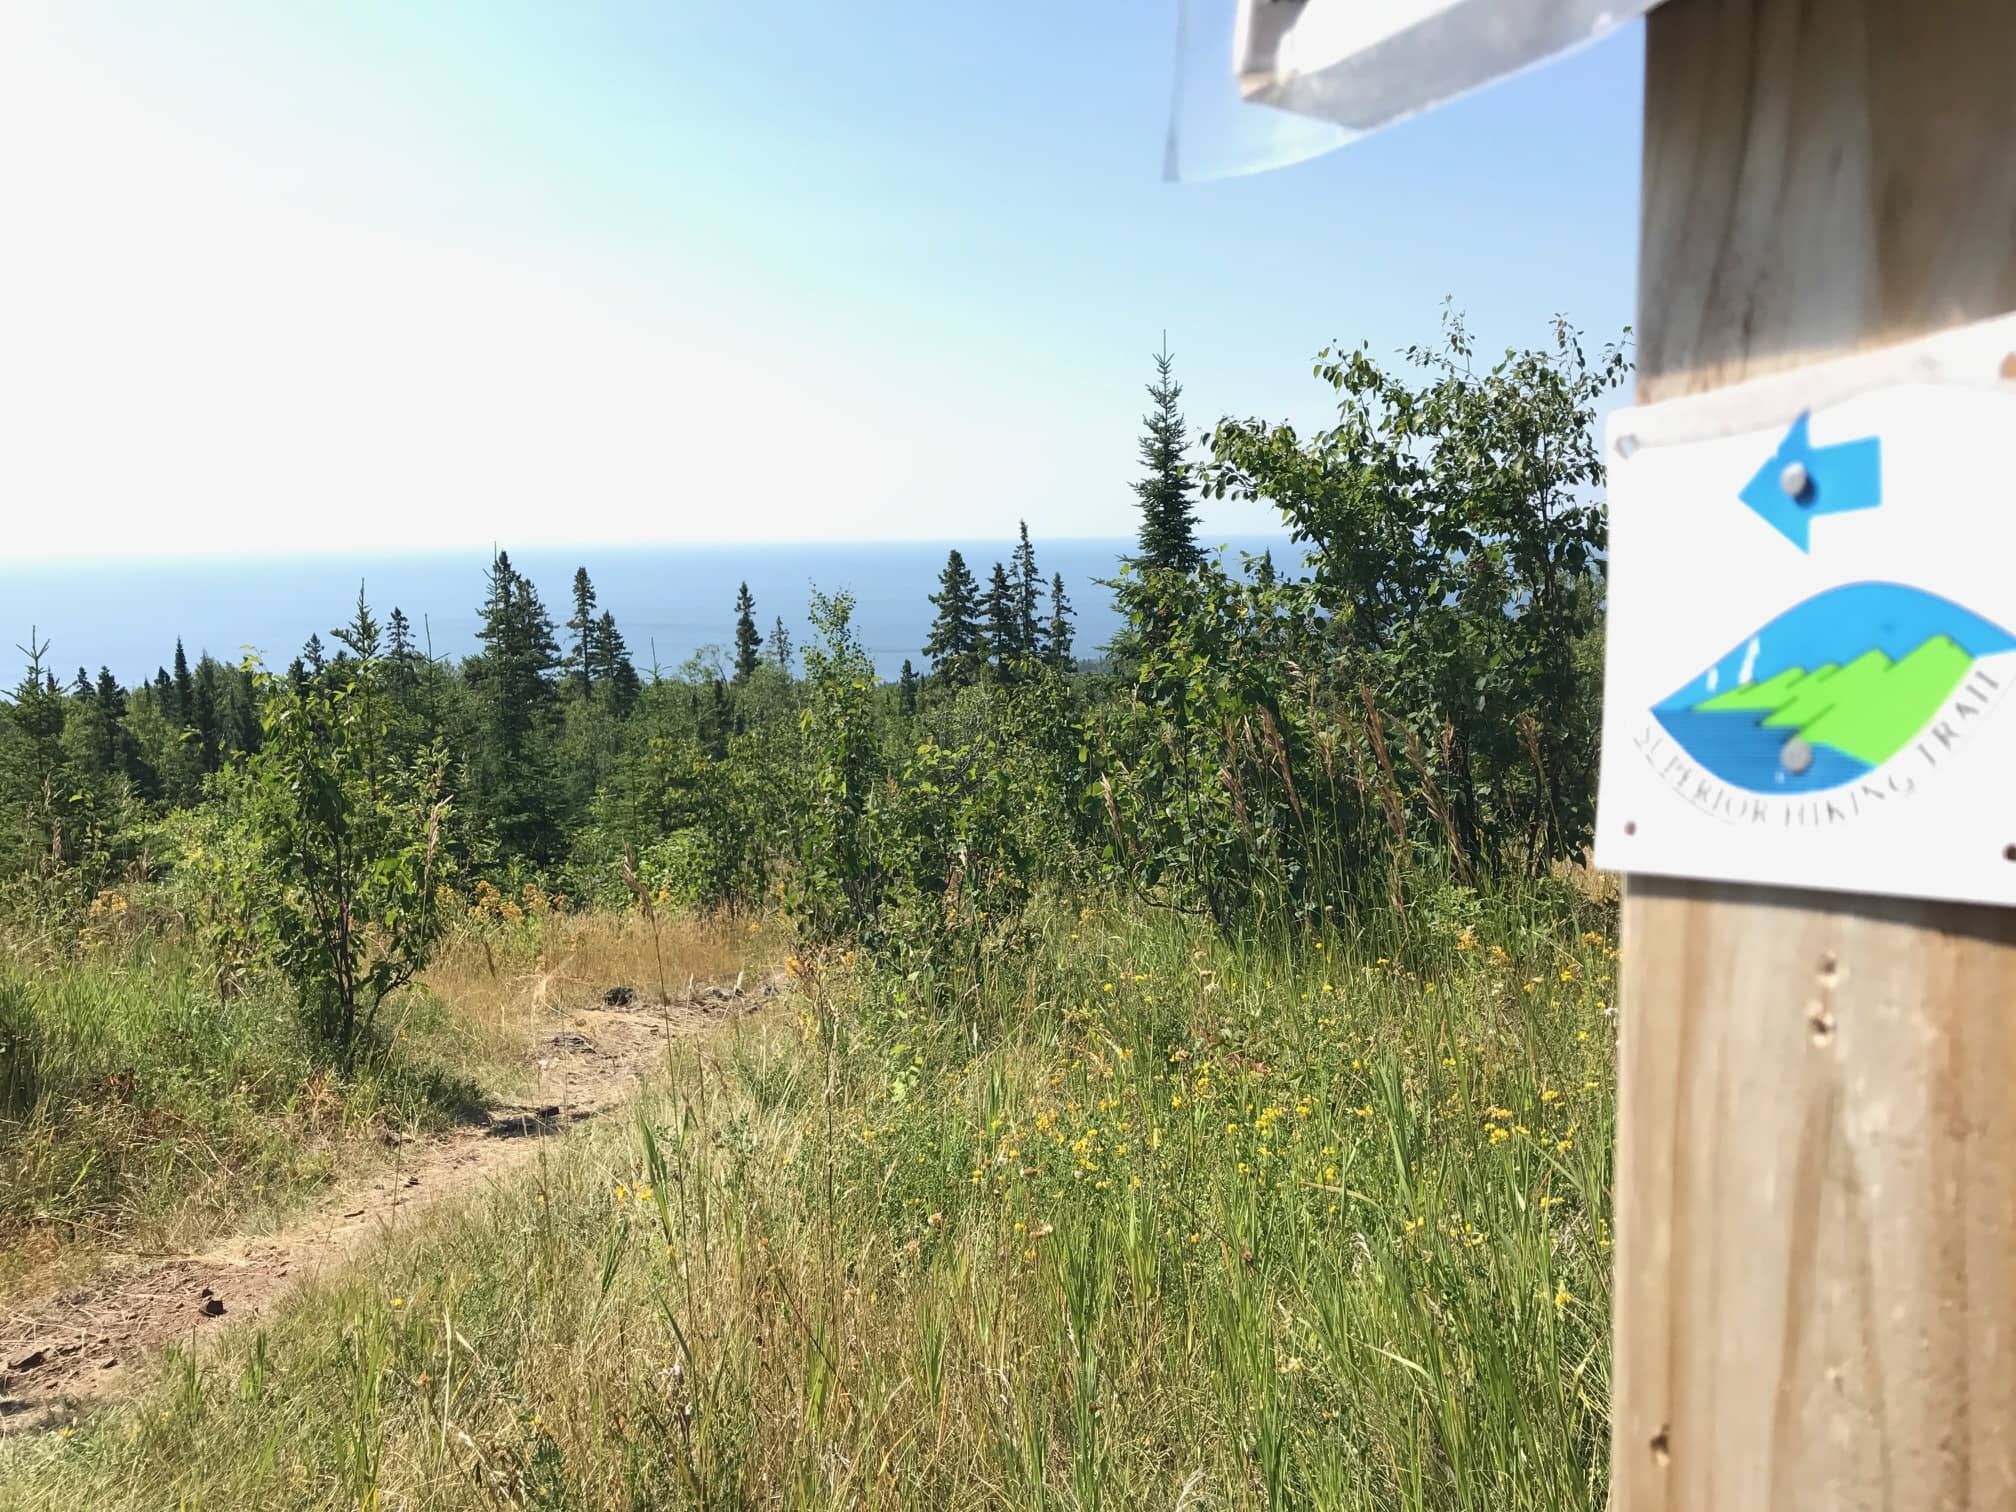 The Superior Hiking Trail Route Marker